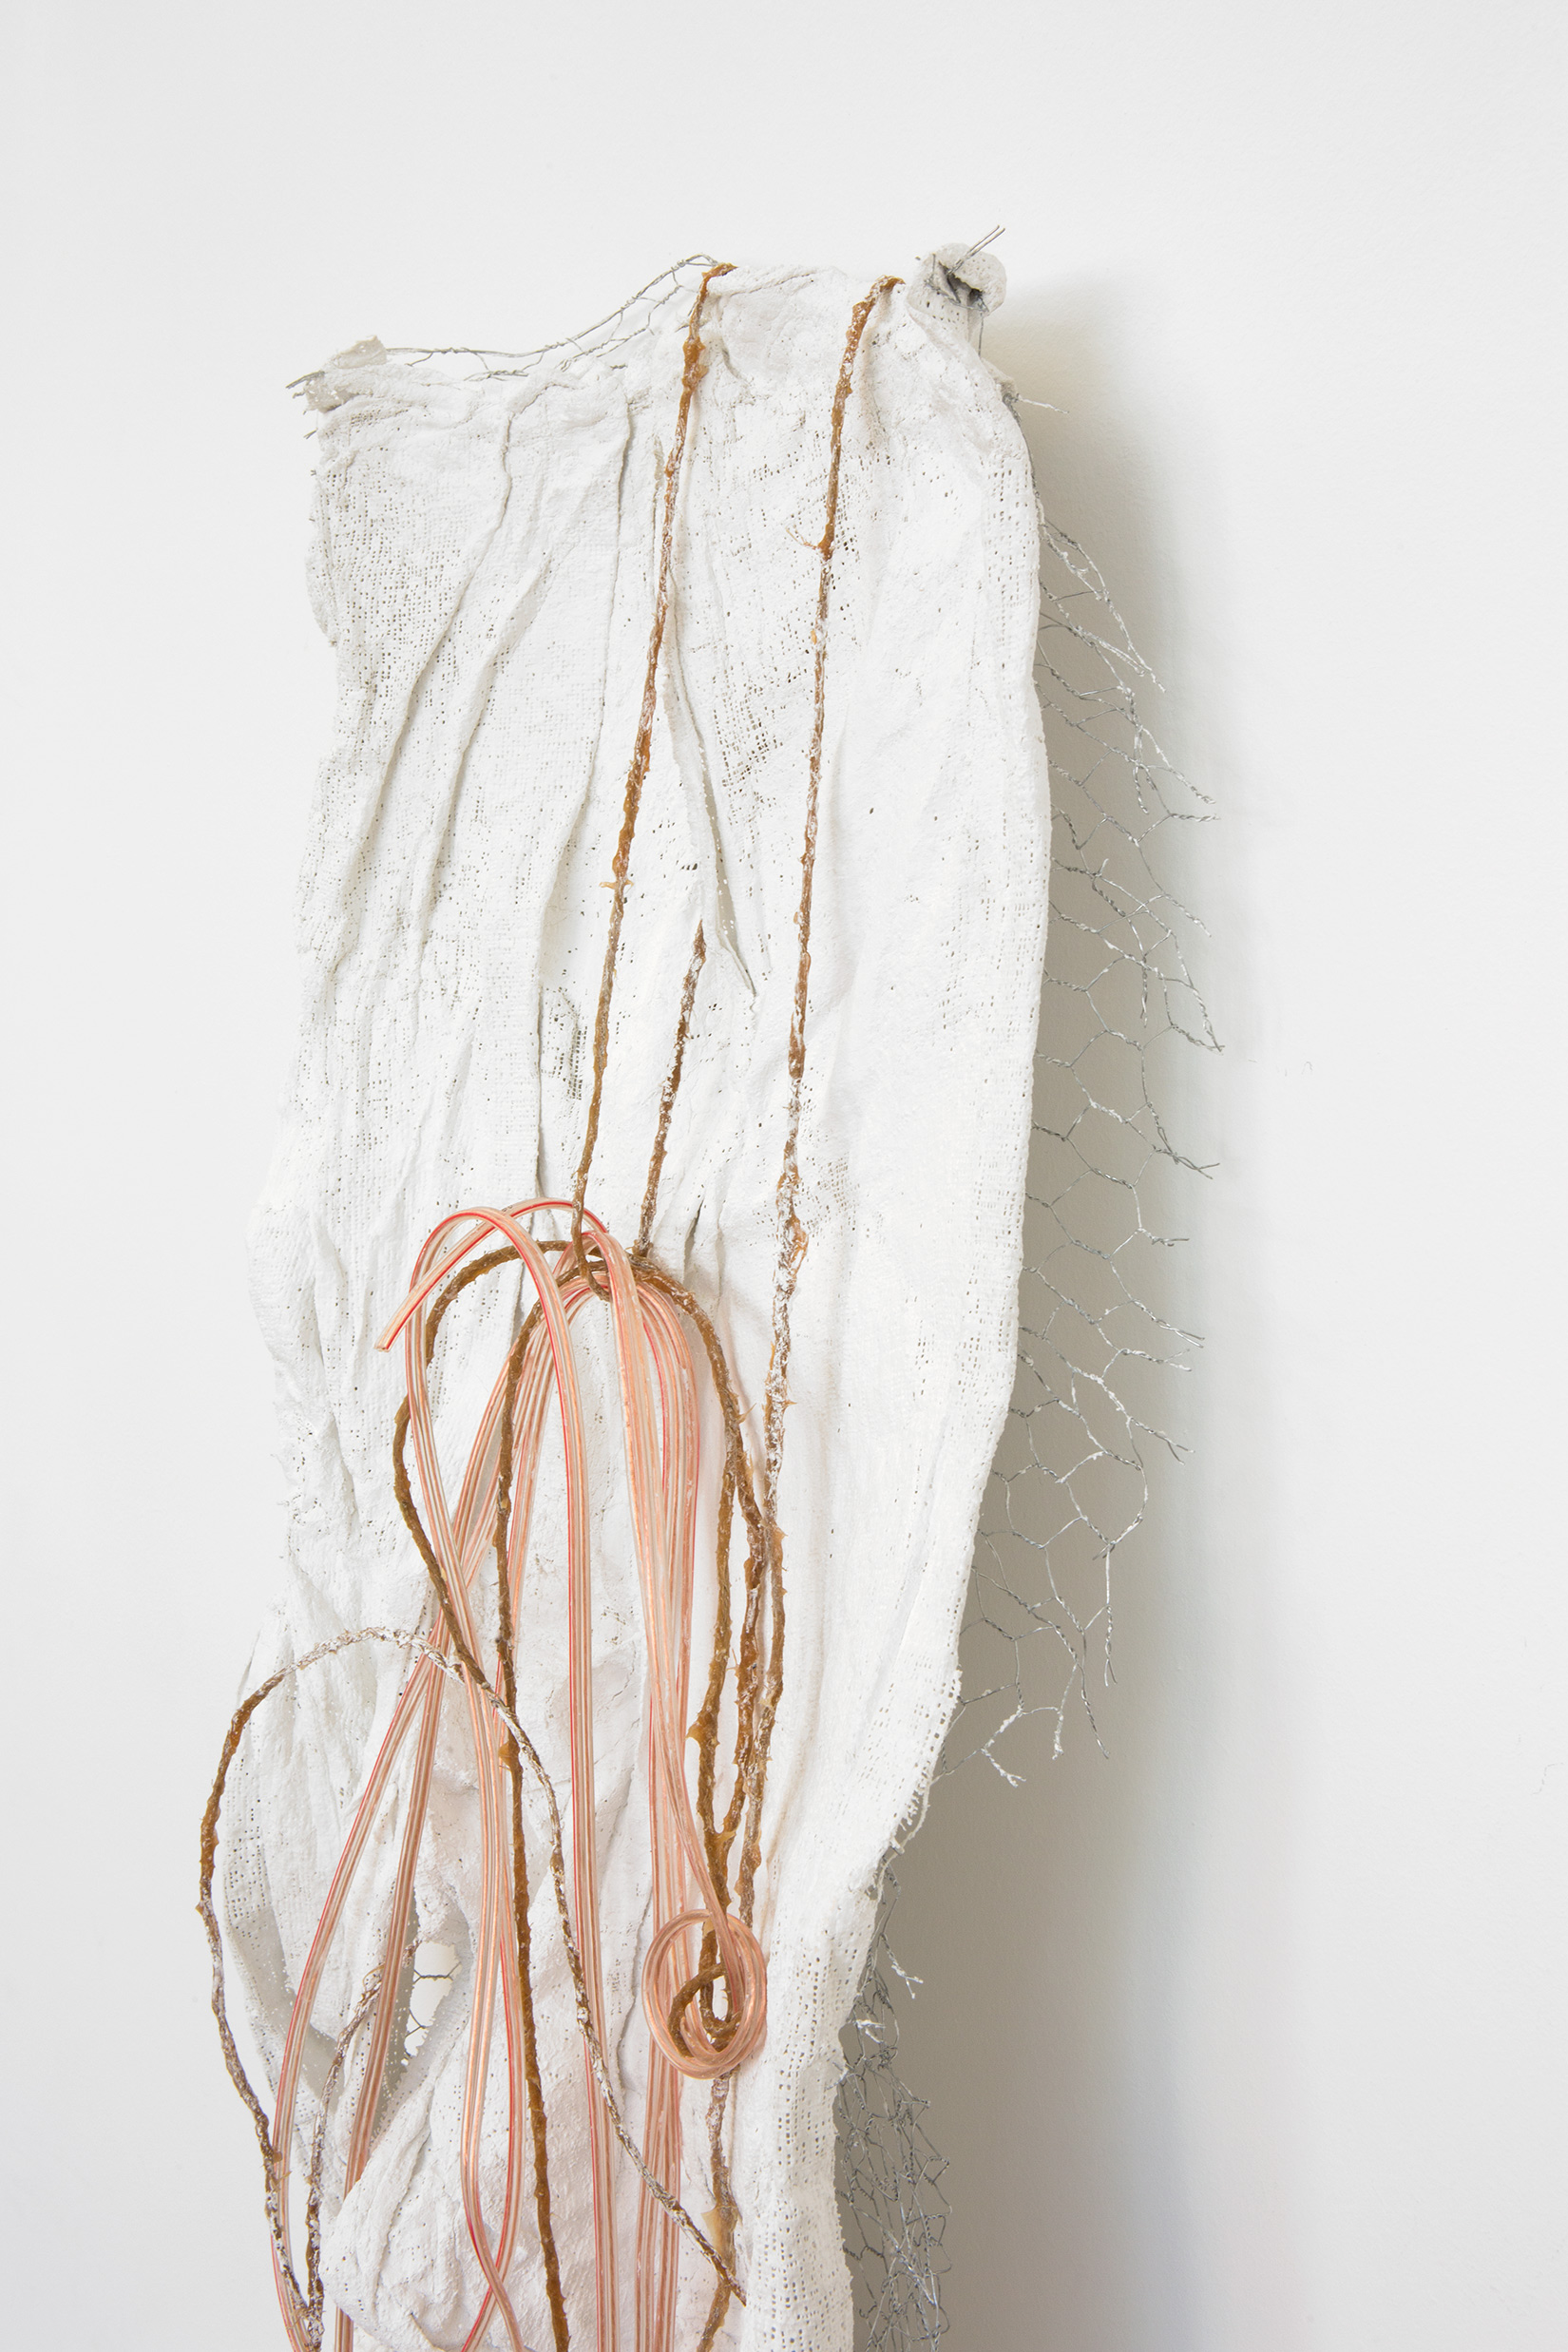 Marian Tubbs, “to bribe them by a rose” (detail), 2014, twine, latex, speaker cable, plaster bandage, wire, 1300 × 350 × 120 mm